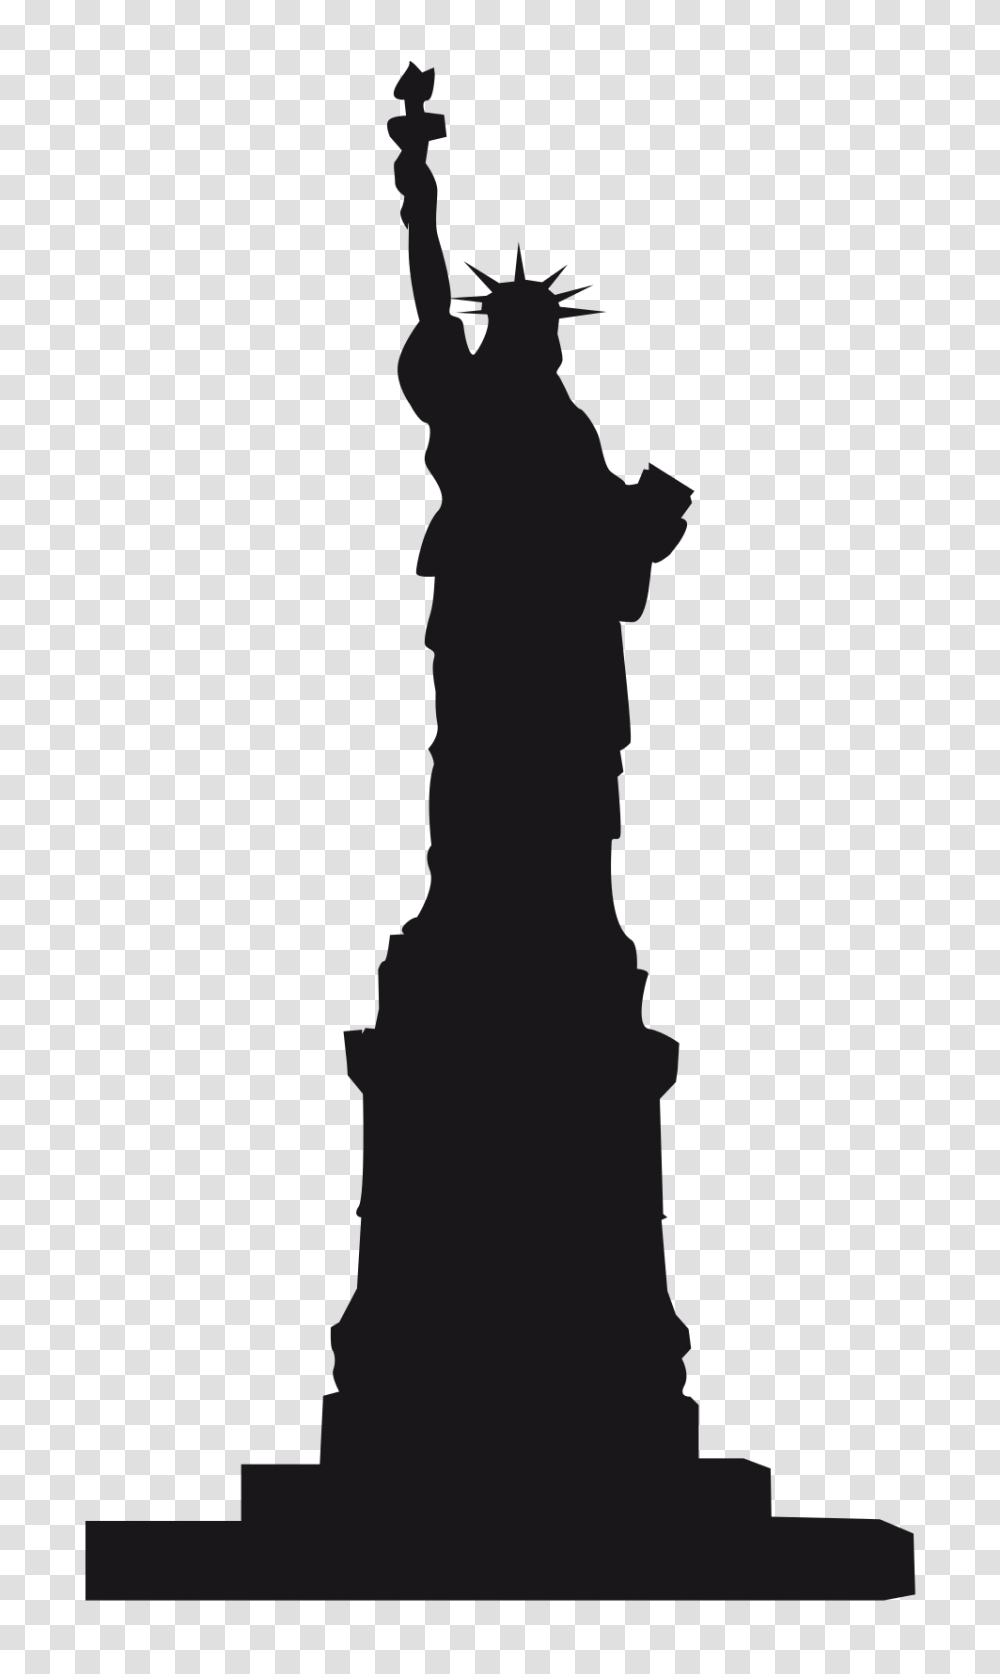 Silhouette Of The Statue Of Liberty In New York, Person, Arrow, Emblem Transparent Png